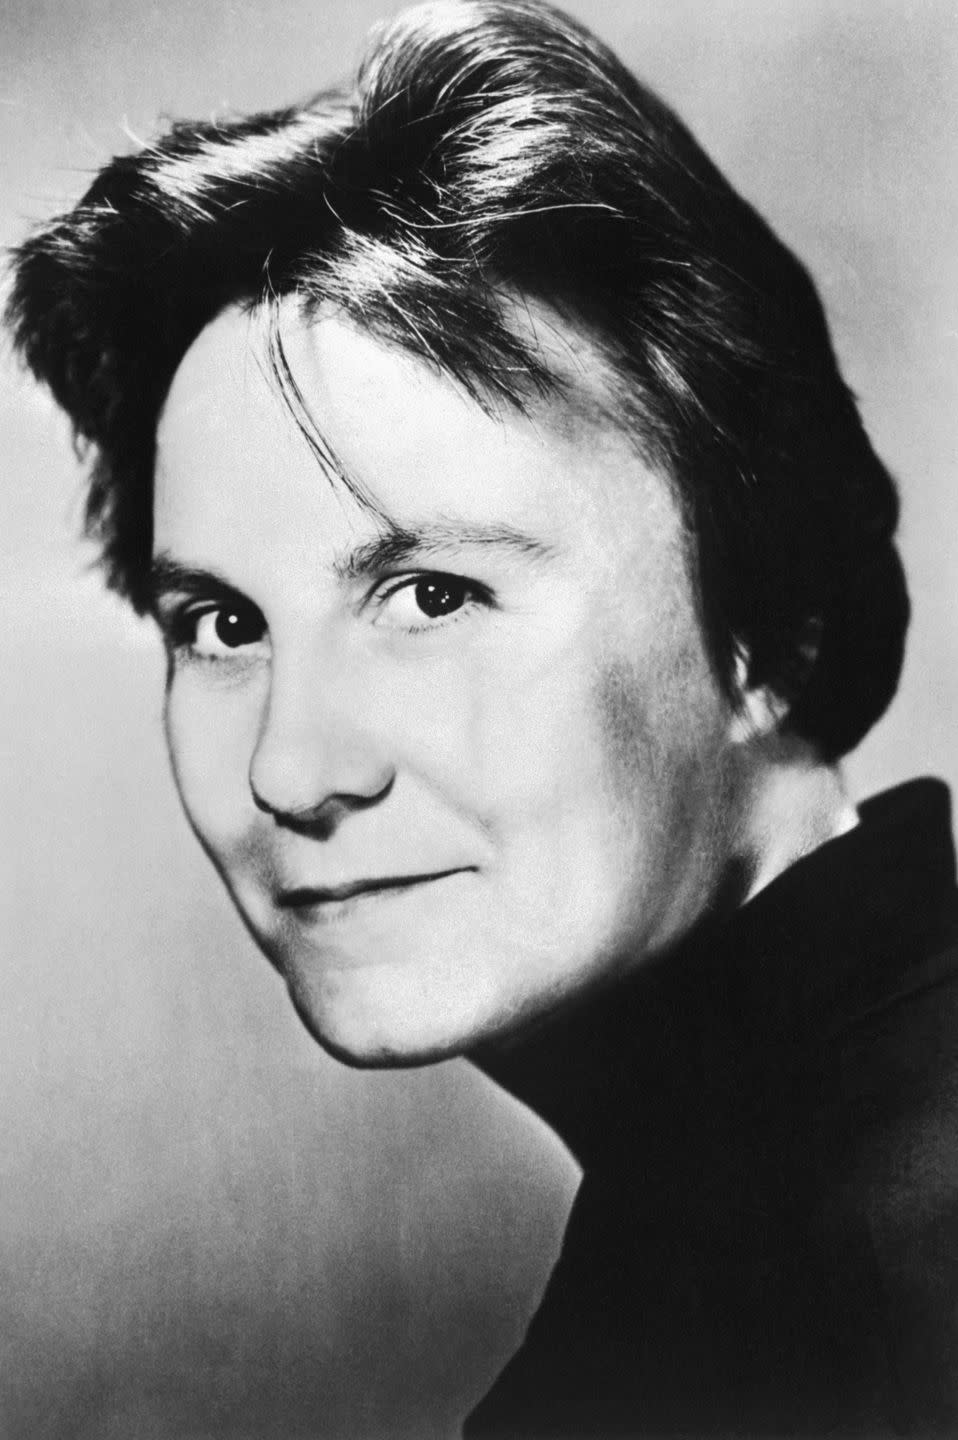 <p>Nelle Harper Lee was born in Monroeville Alabama. She is most famous for her 1960 novel <em>To Kill A Mockingbird</em>, which spawned both a 1962 film adaptation, a 2018 play, and a “sequel” (it was really an unreleased draft of <em>To Kill a Mockingbird</em>) <em>Go Set a Watchman</em>. Although she only ever published two books, she was awarded the Presidential Medal of Freedom in 2007 for her contributions to literature.</p>